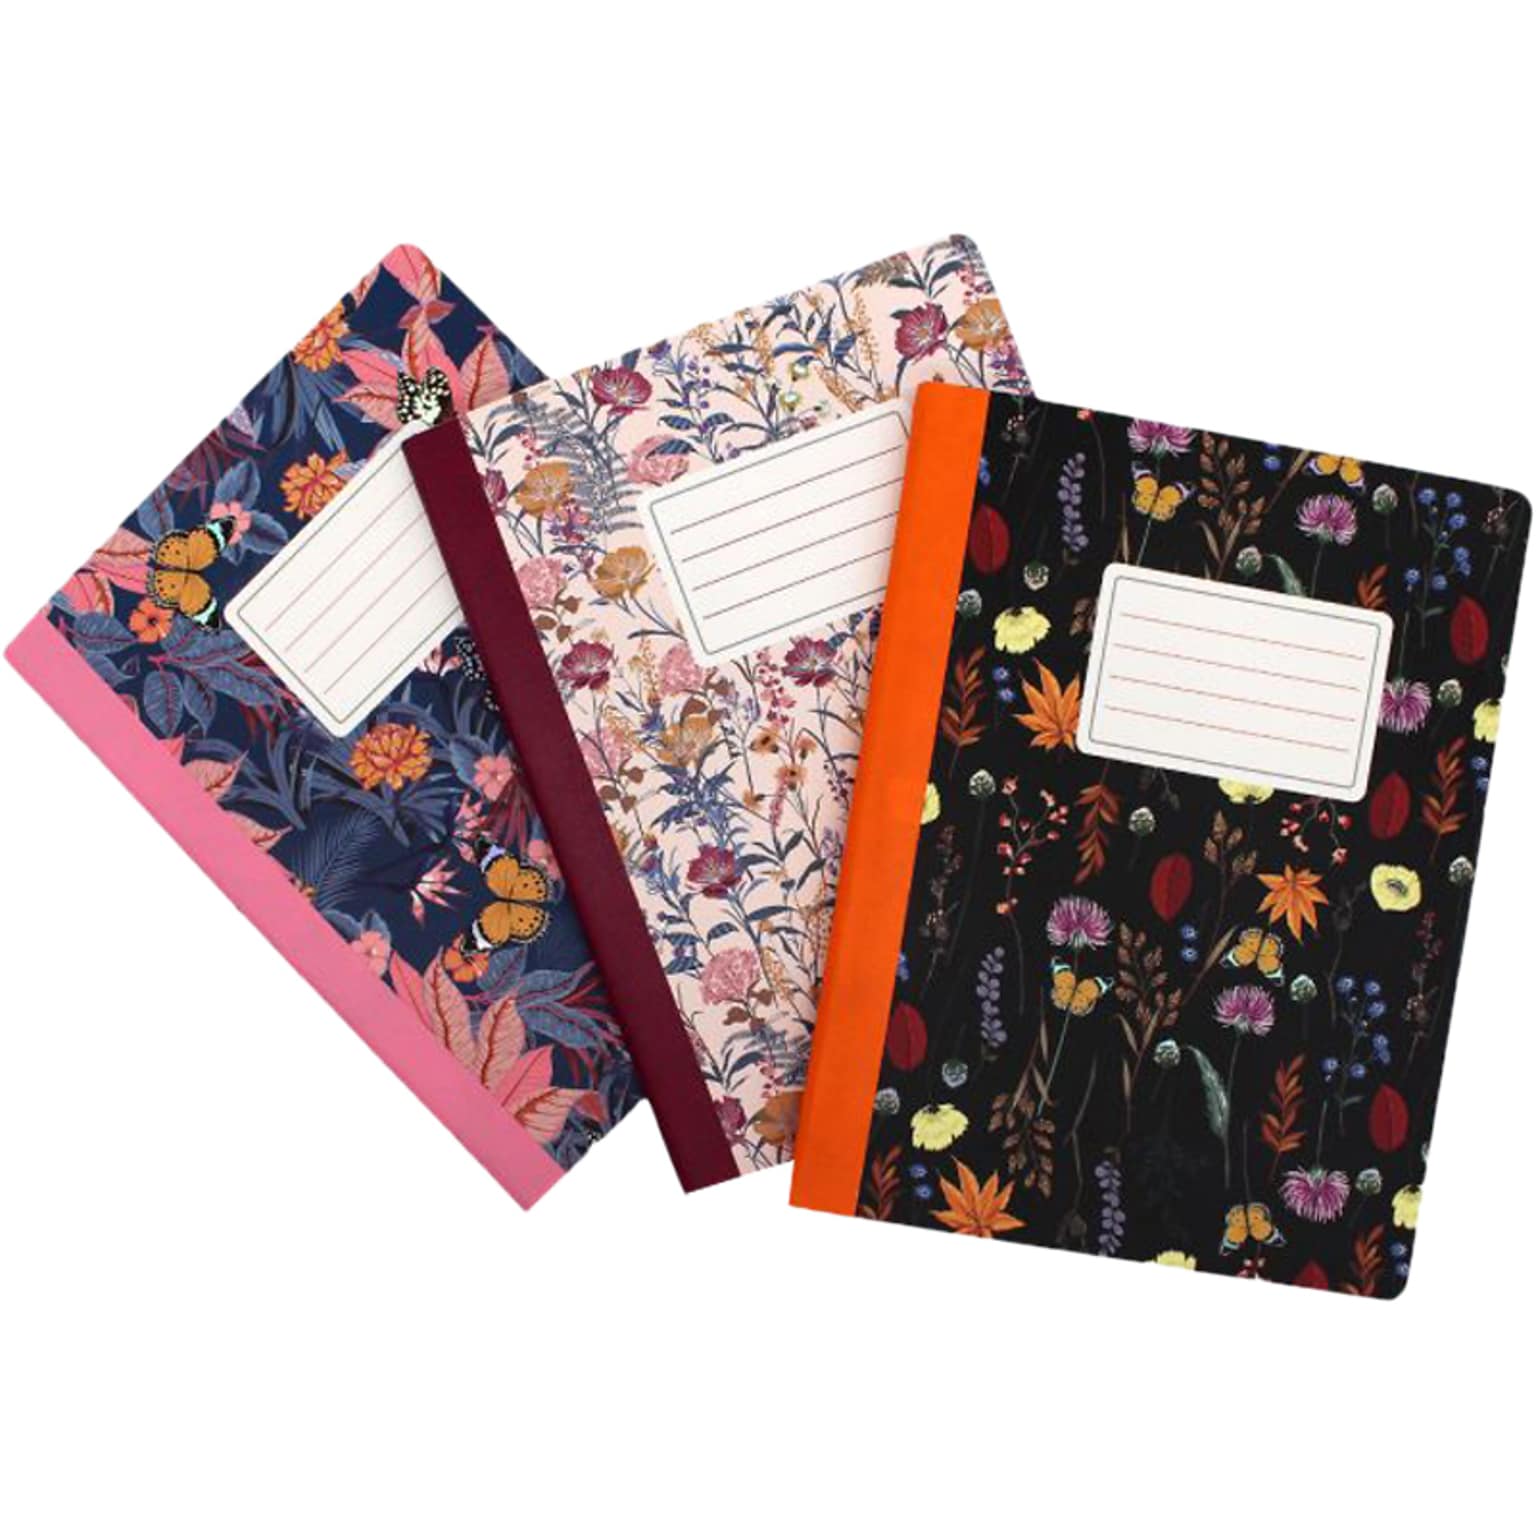 Pukka Pad Bloom Composition Notebooks, 7.5 x 9.7, College Ruled, 70 Sheets, Assorted Colors, 3/Pack (9516-BLM)